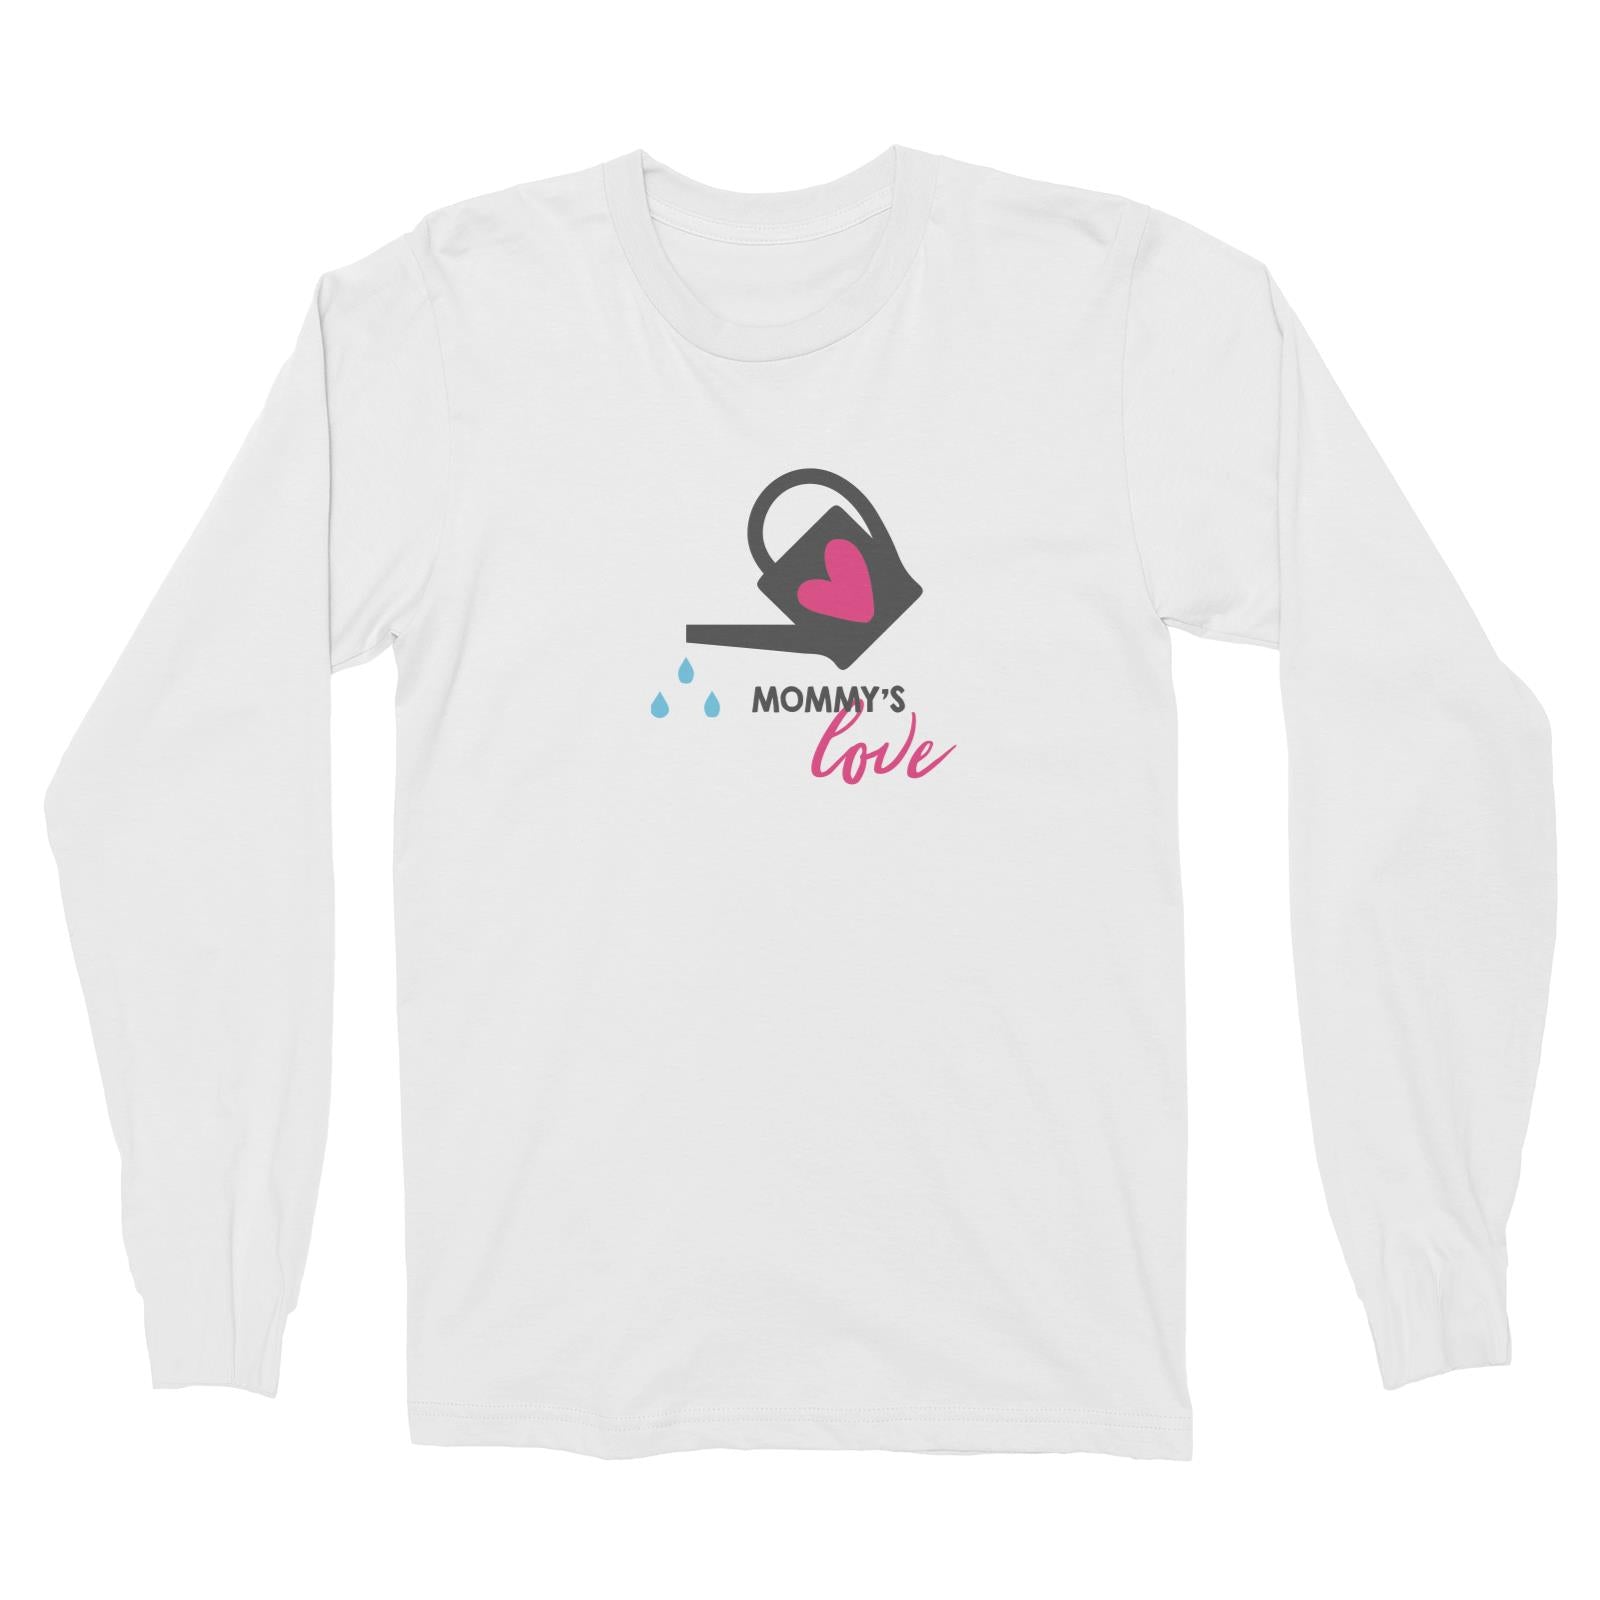 Nurturing Mommy's Love Long Sleeve Unisex T-Shirt  Matching Family